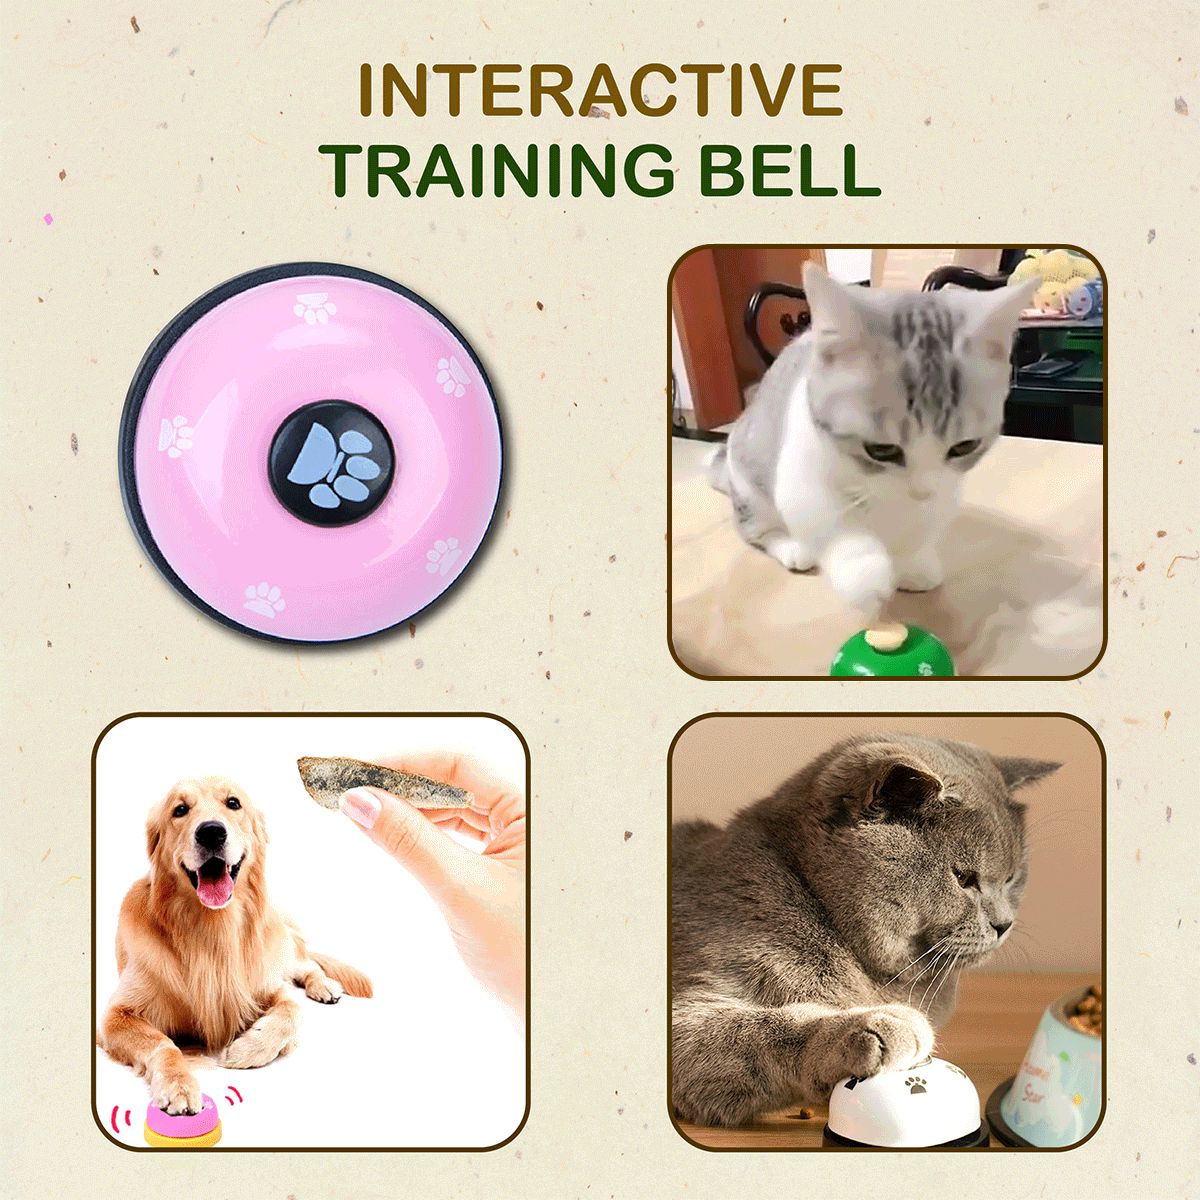 interactive training bell toy for pets, potty training, housebreaking, dog training, cat training, pet training